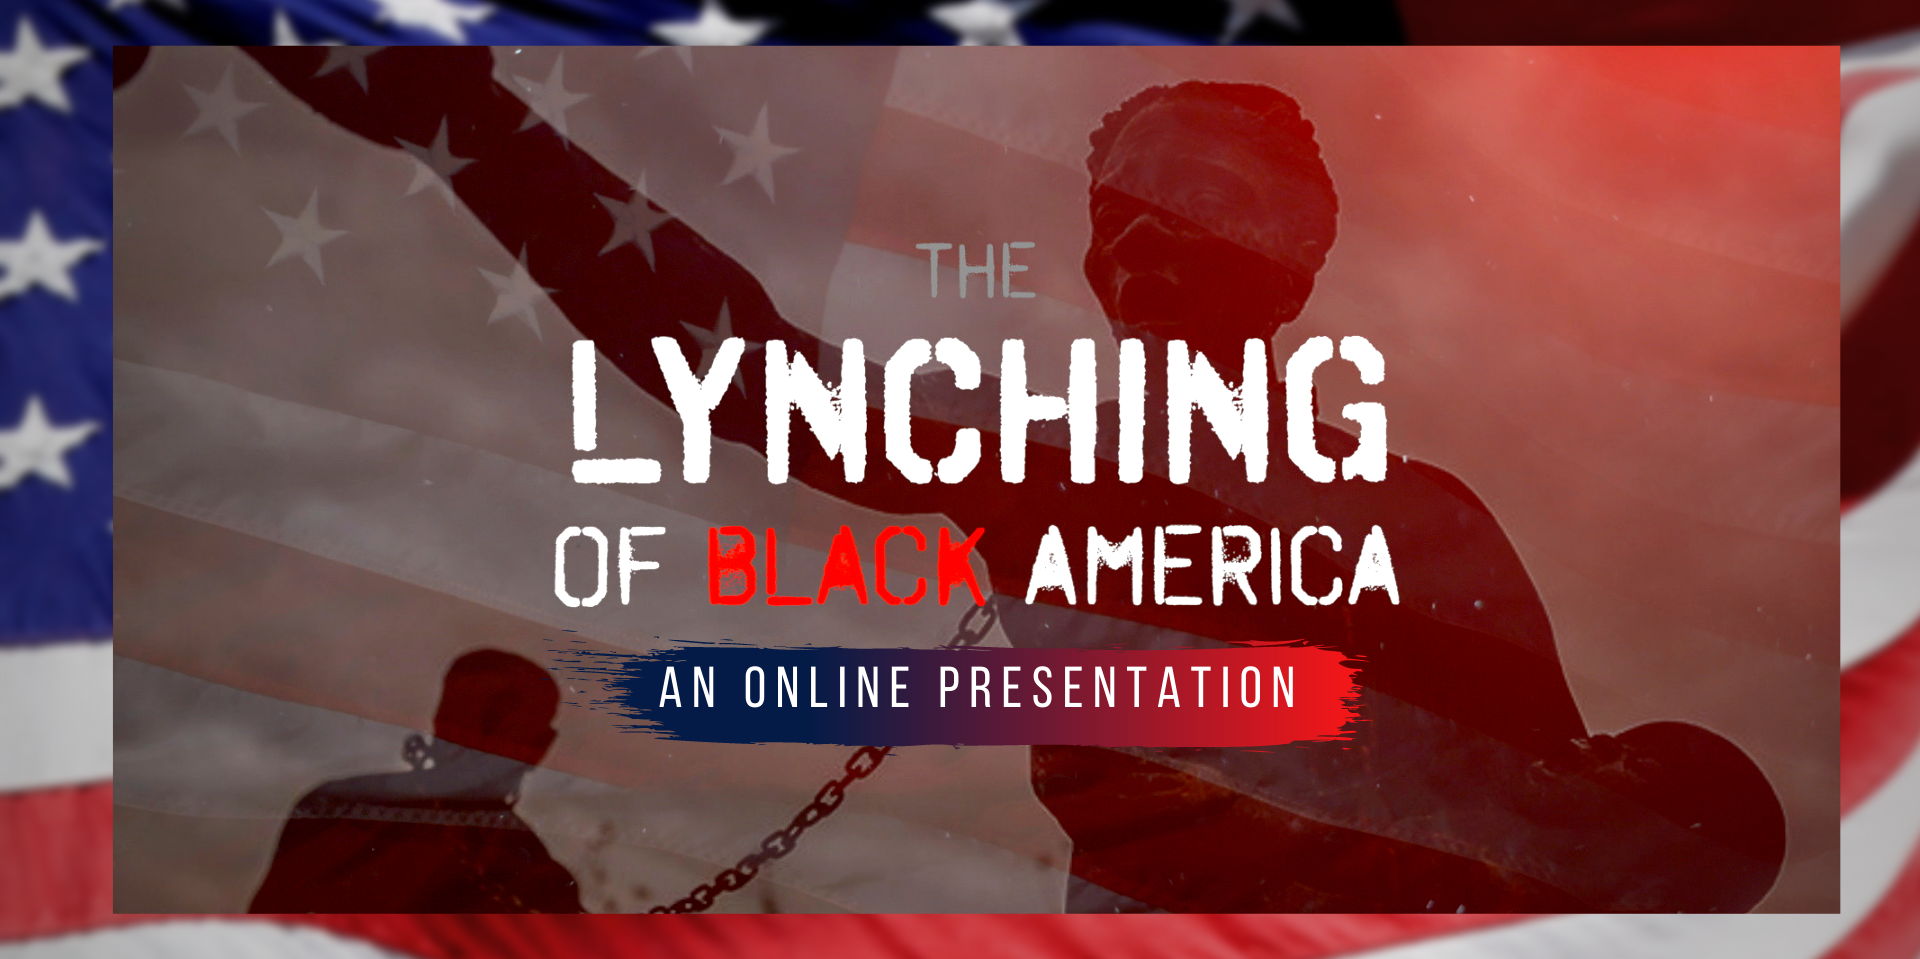 The Lynching of Black America promotional image